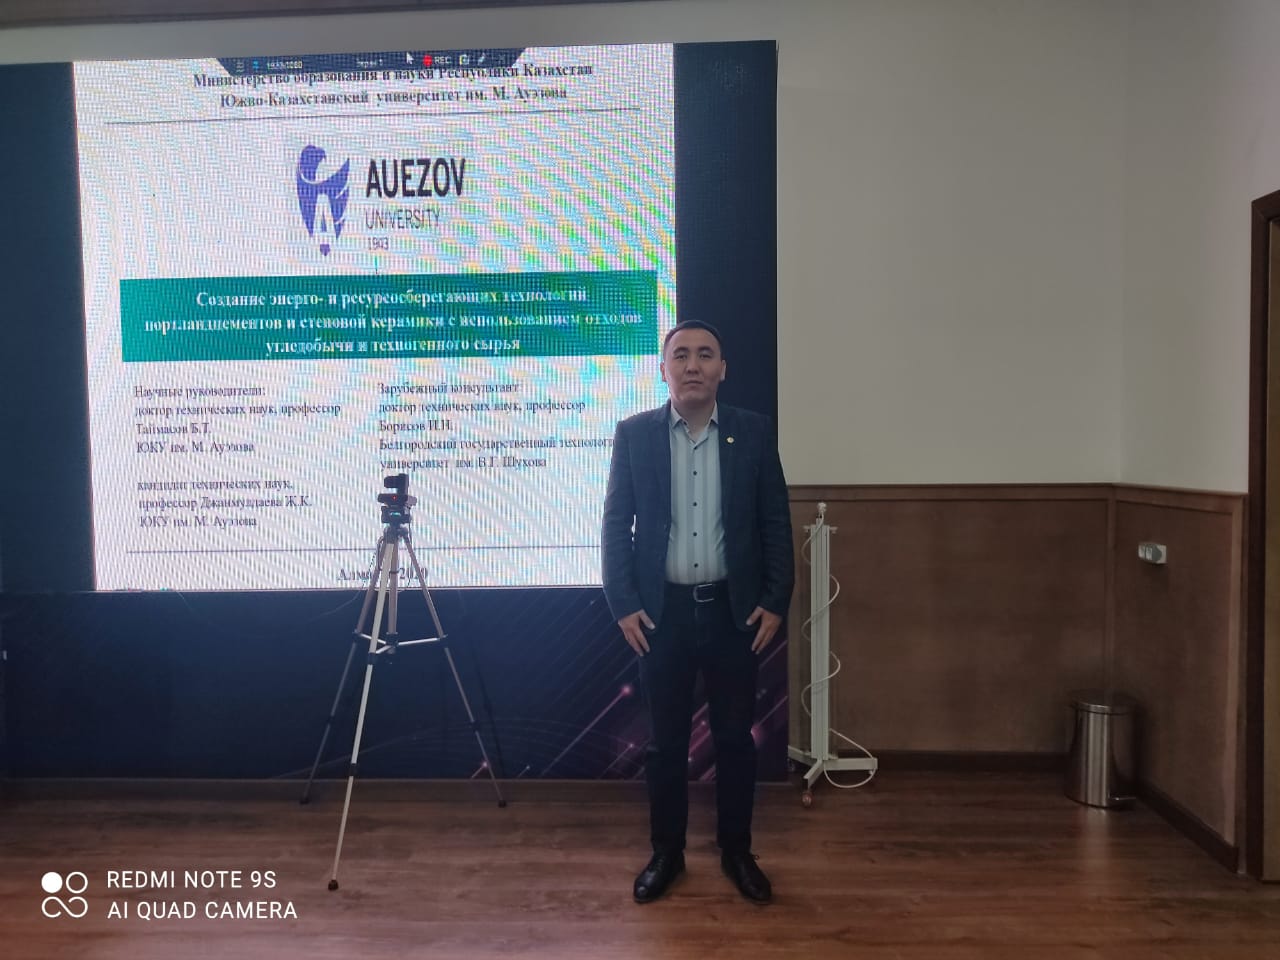 PhD student of M. Auezov South Kazakhstan university in the specialty &quot;6D072000-Chemical technology of inorganic substances&quot; Zhanikulov Nurgali Nadyruly December 14, 2020 successfully defended his PhD doctoral dissertation at the dissertation council &quot;Che